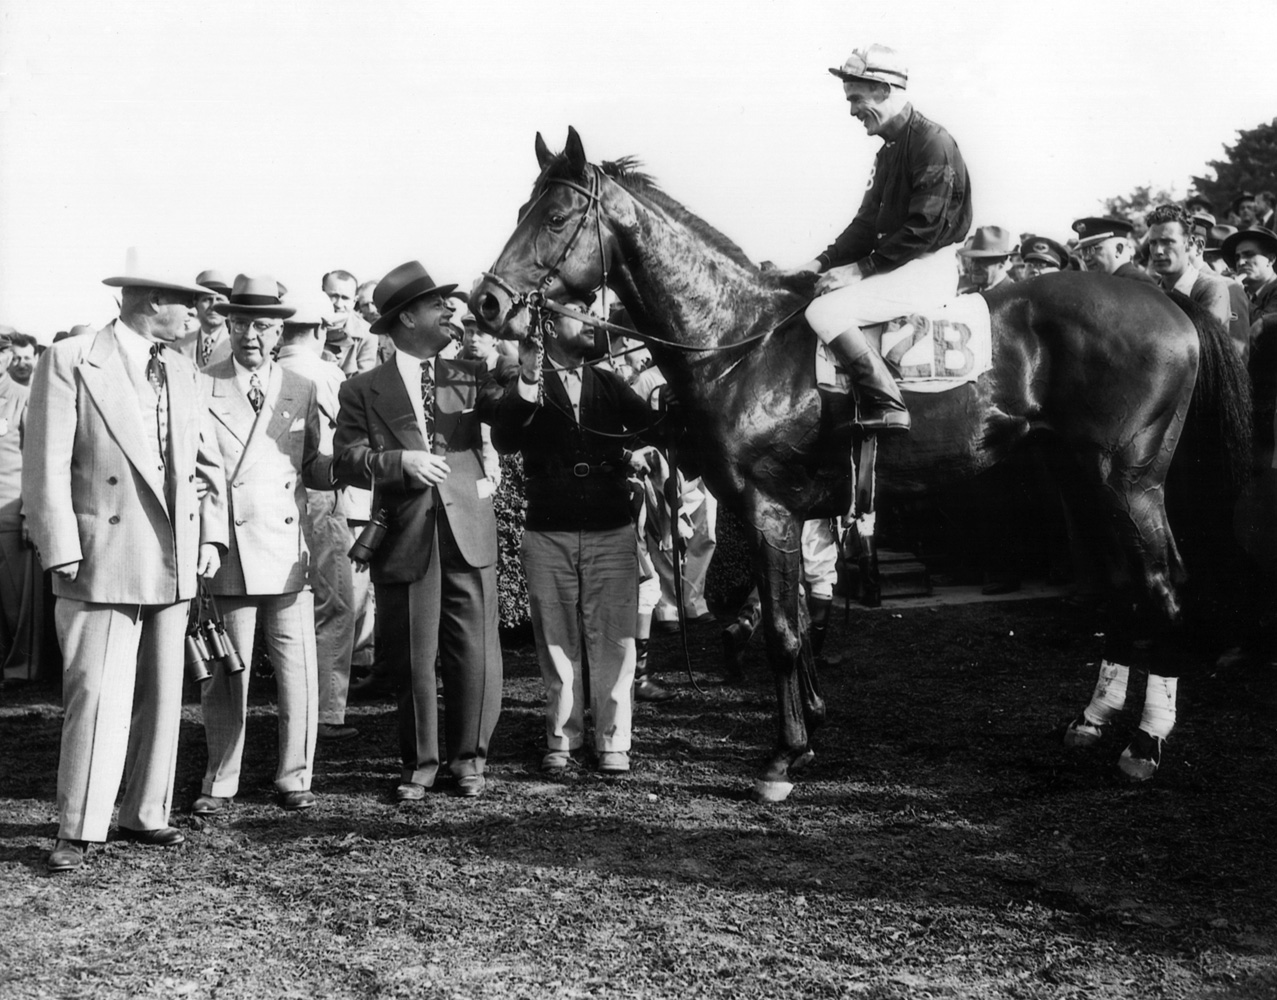 Citation (Al Snider up) in the winner's circle for the Belmont Futurity (Museum Collection)